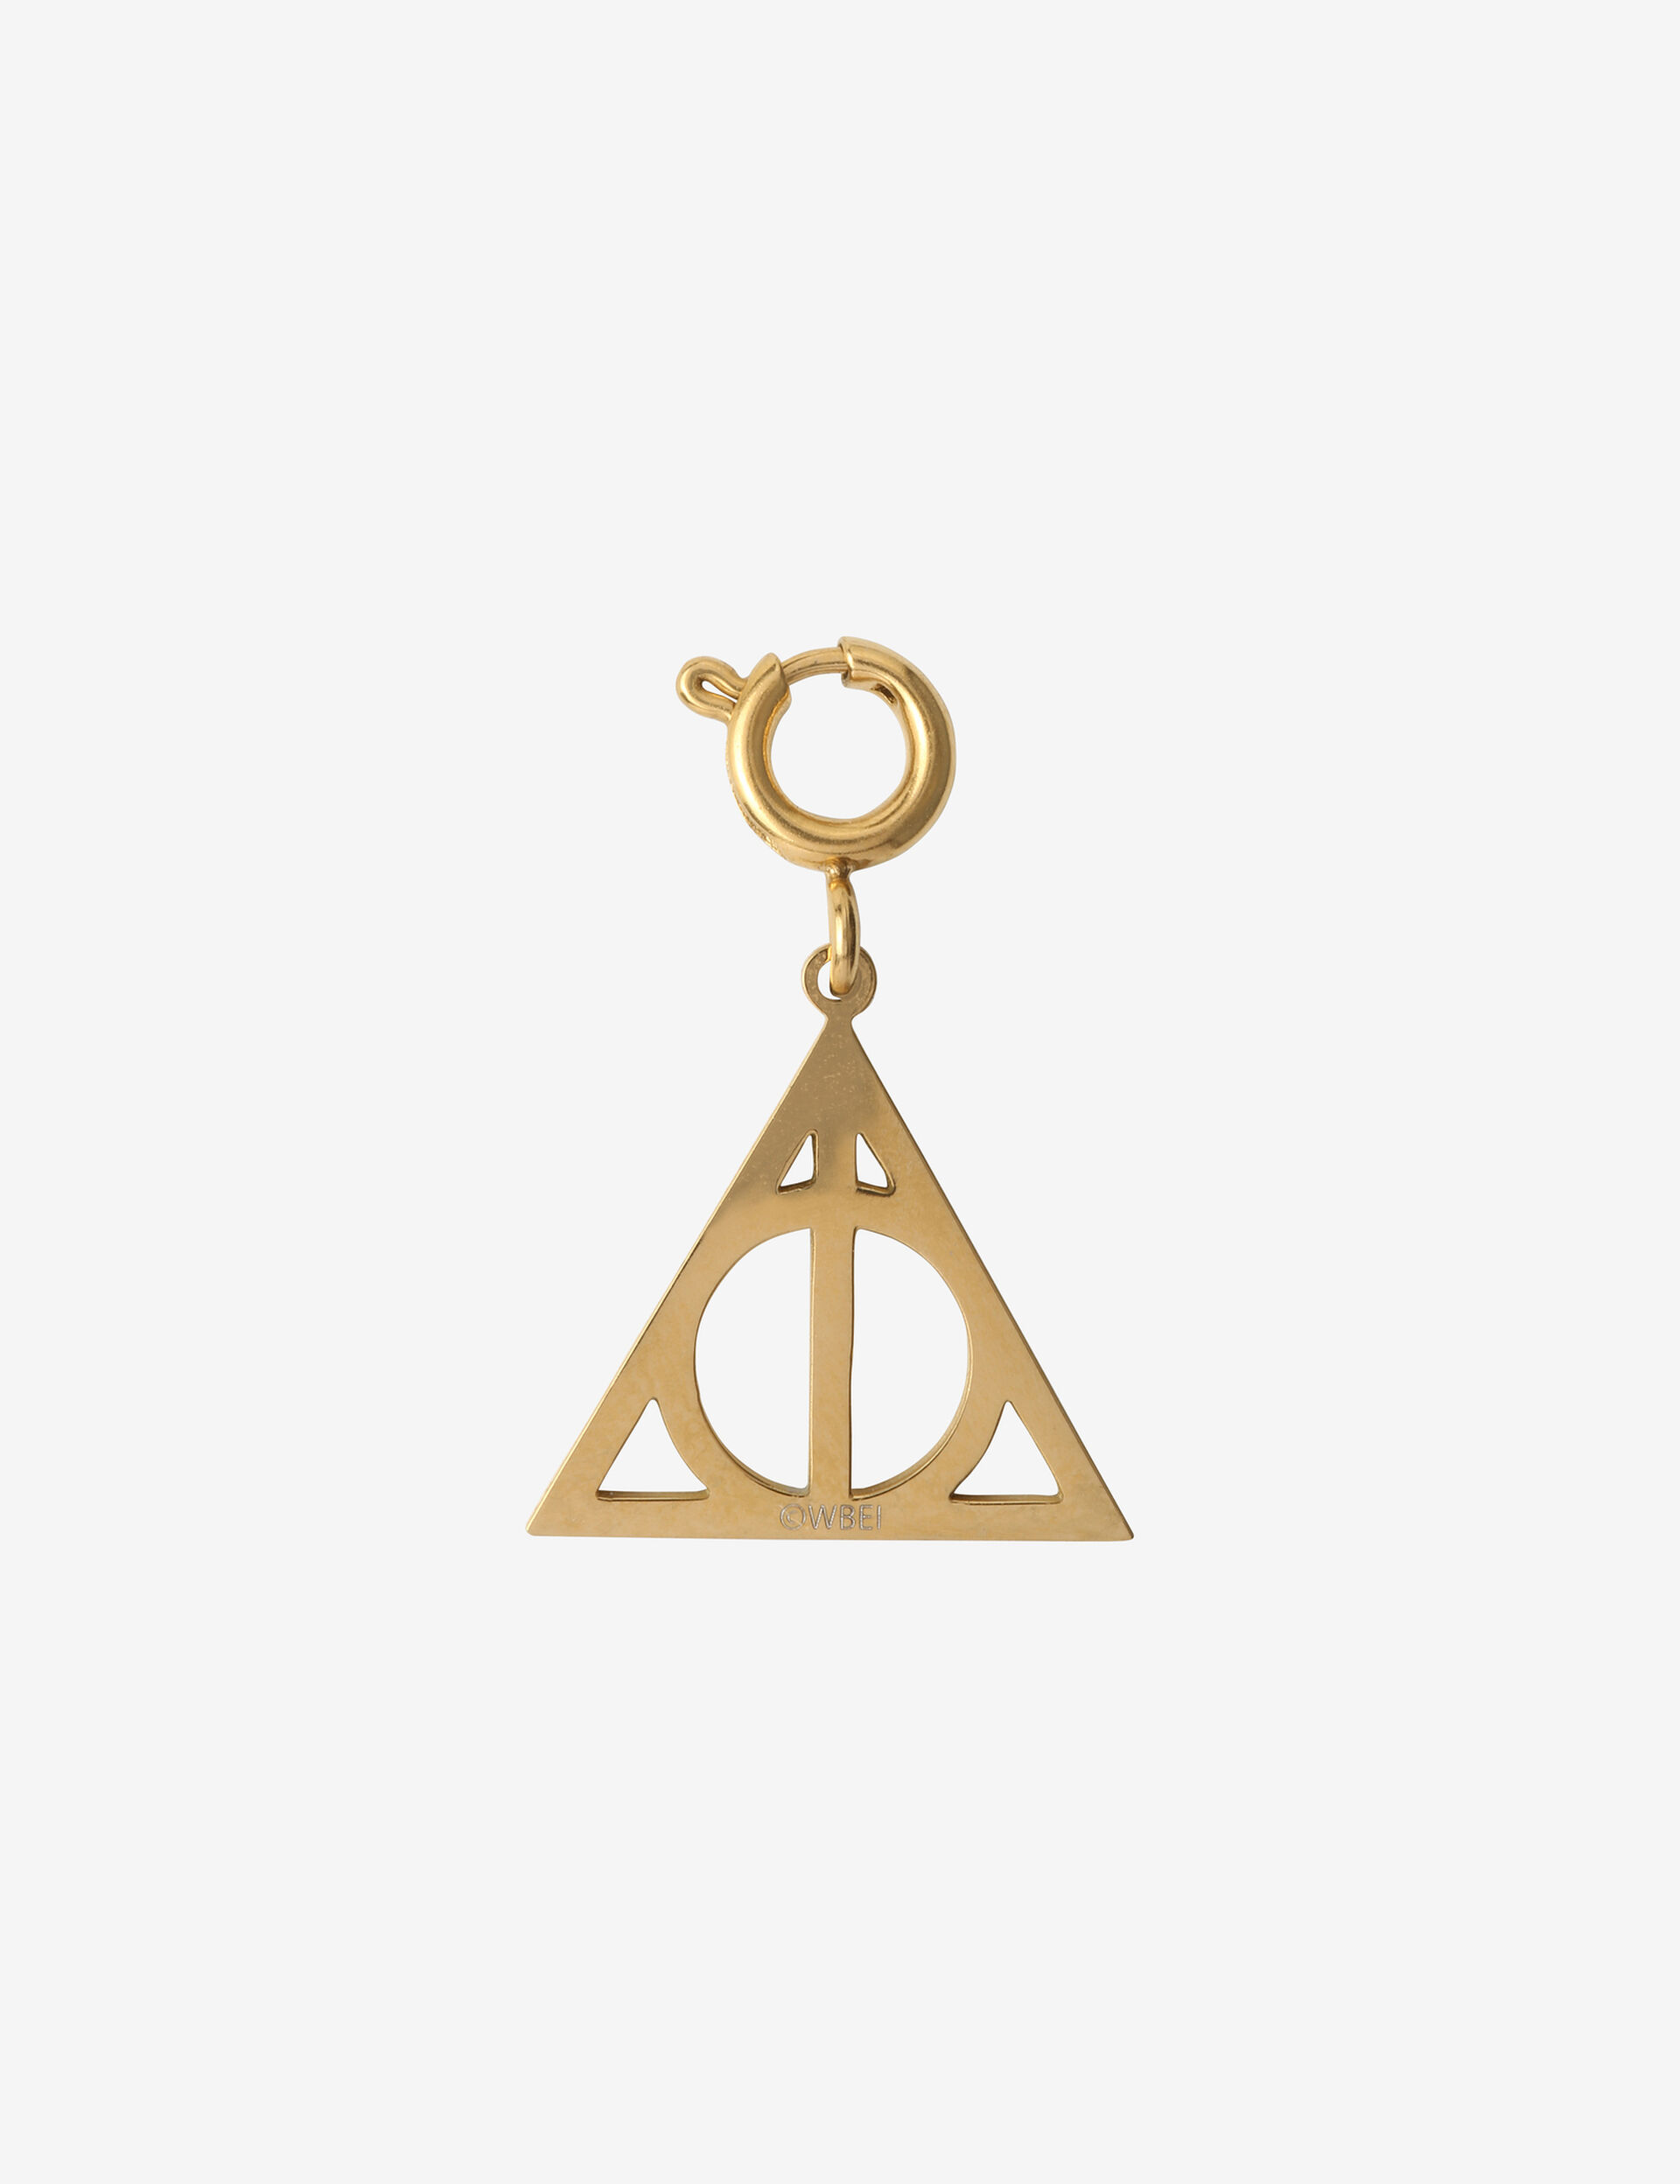 Harry Potter Deathly Hallows charm